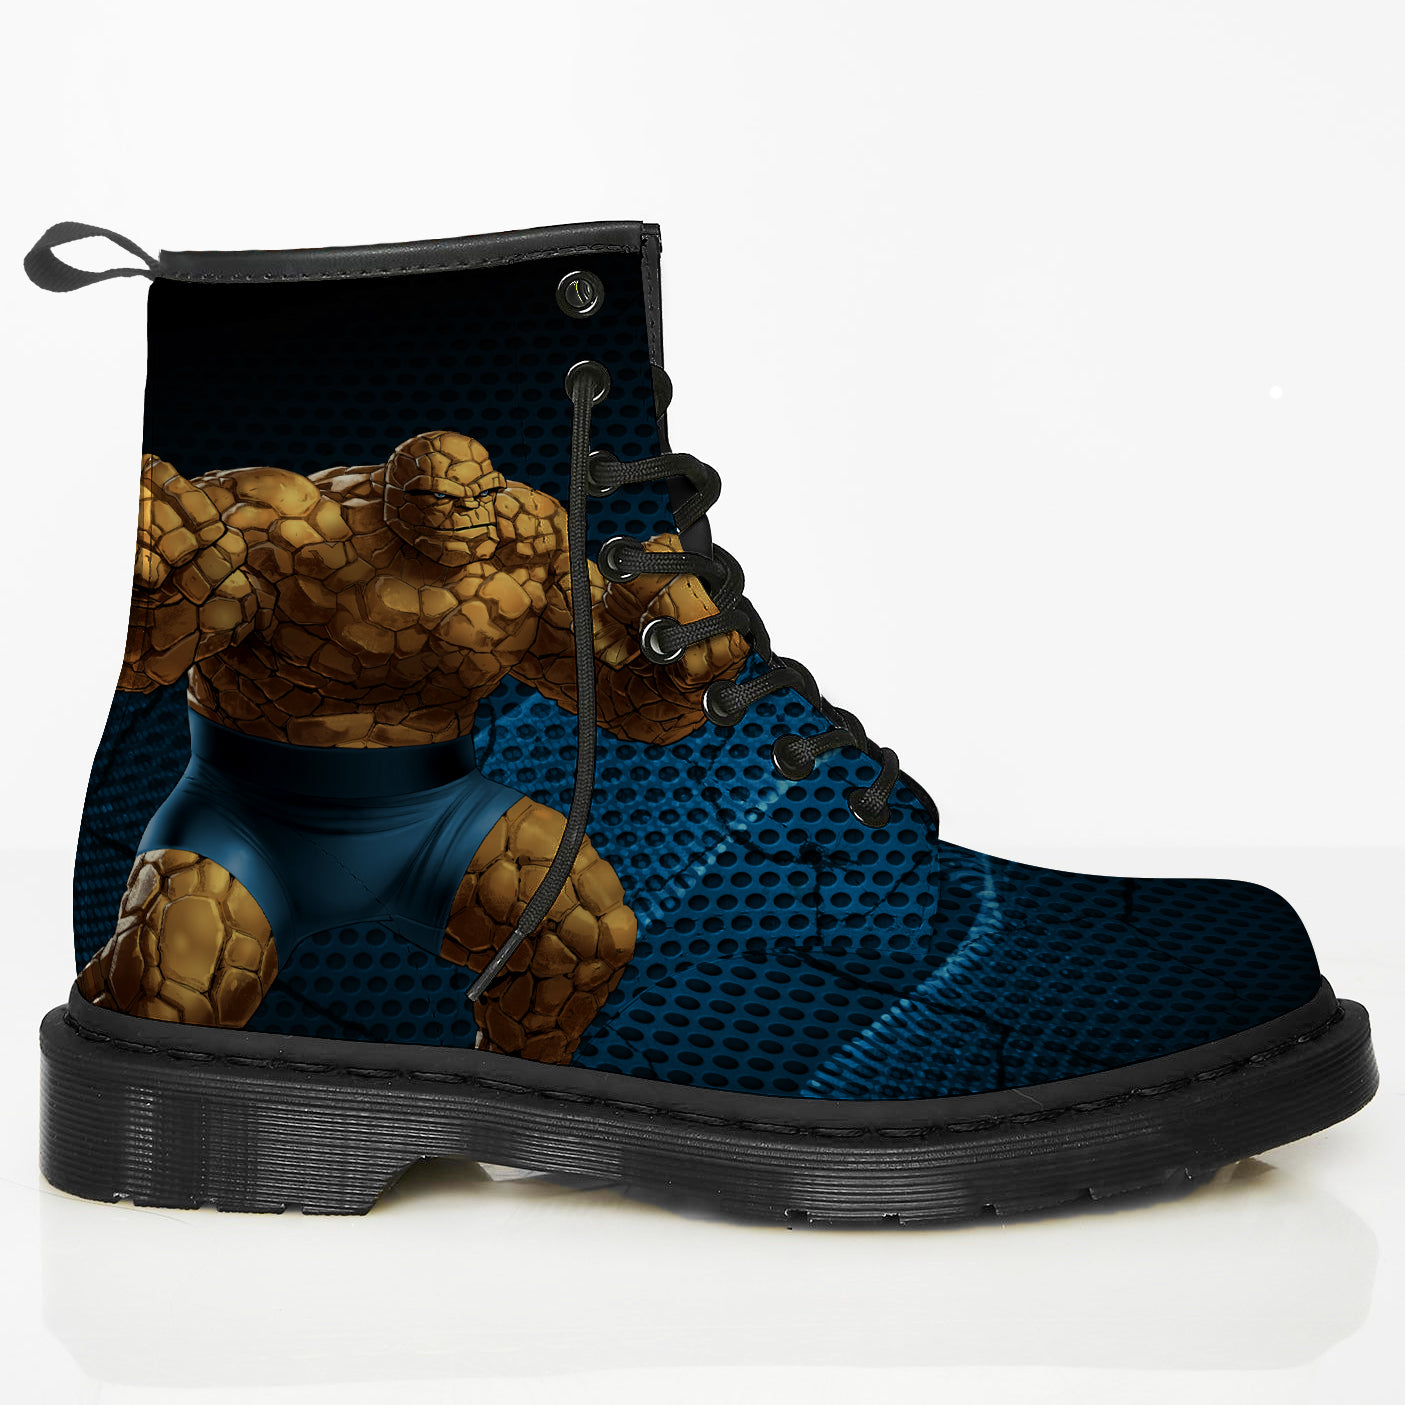 The Thing Boots